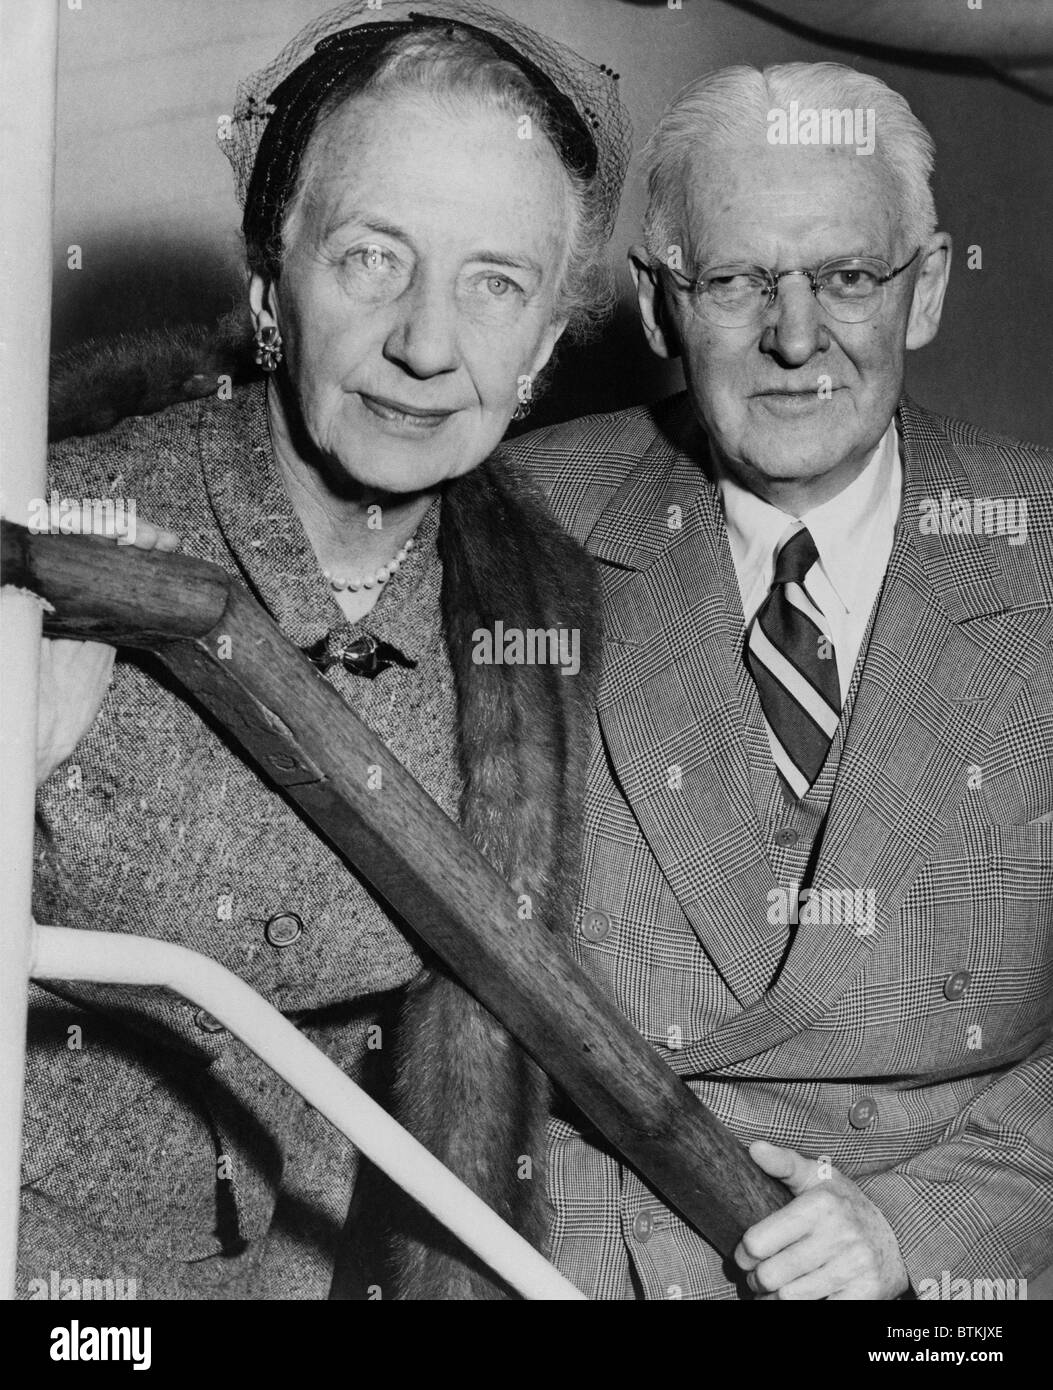 Dr. Sara Claudia Murray Jordan (1884-1959), a gastroenterologist and one of the founding physicians of the Lahey Clinic in Boston, Massachusetts. She provided medical care for John F. Kennedy for the 25 years, through his childhood illnesses and early treatment for Addison's disease. 1958 photo with her husband, Penfield Mower. Stock Photo